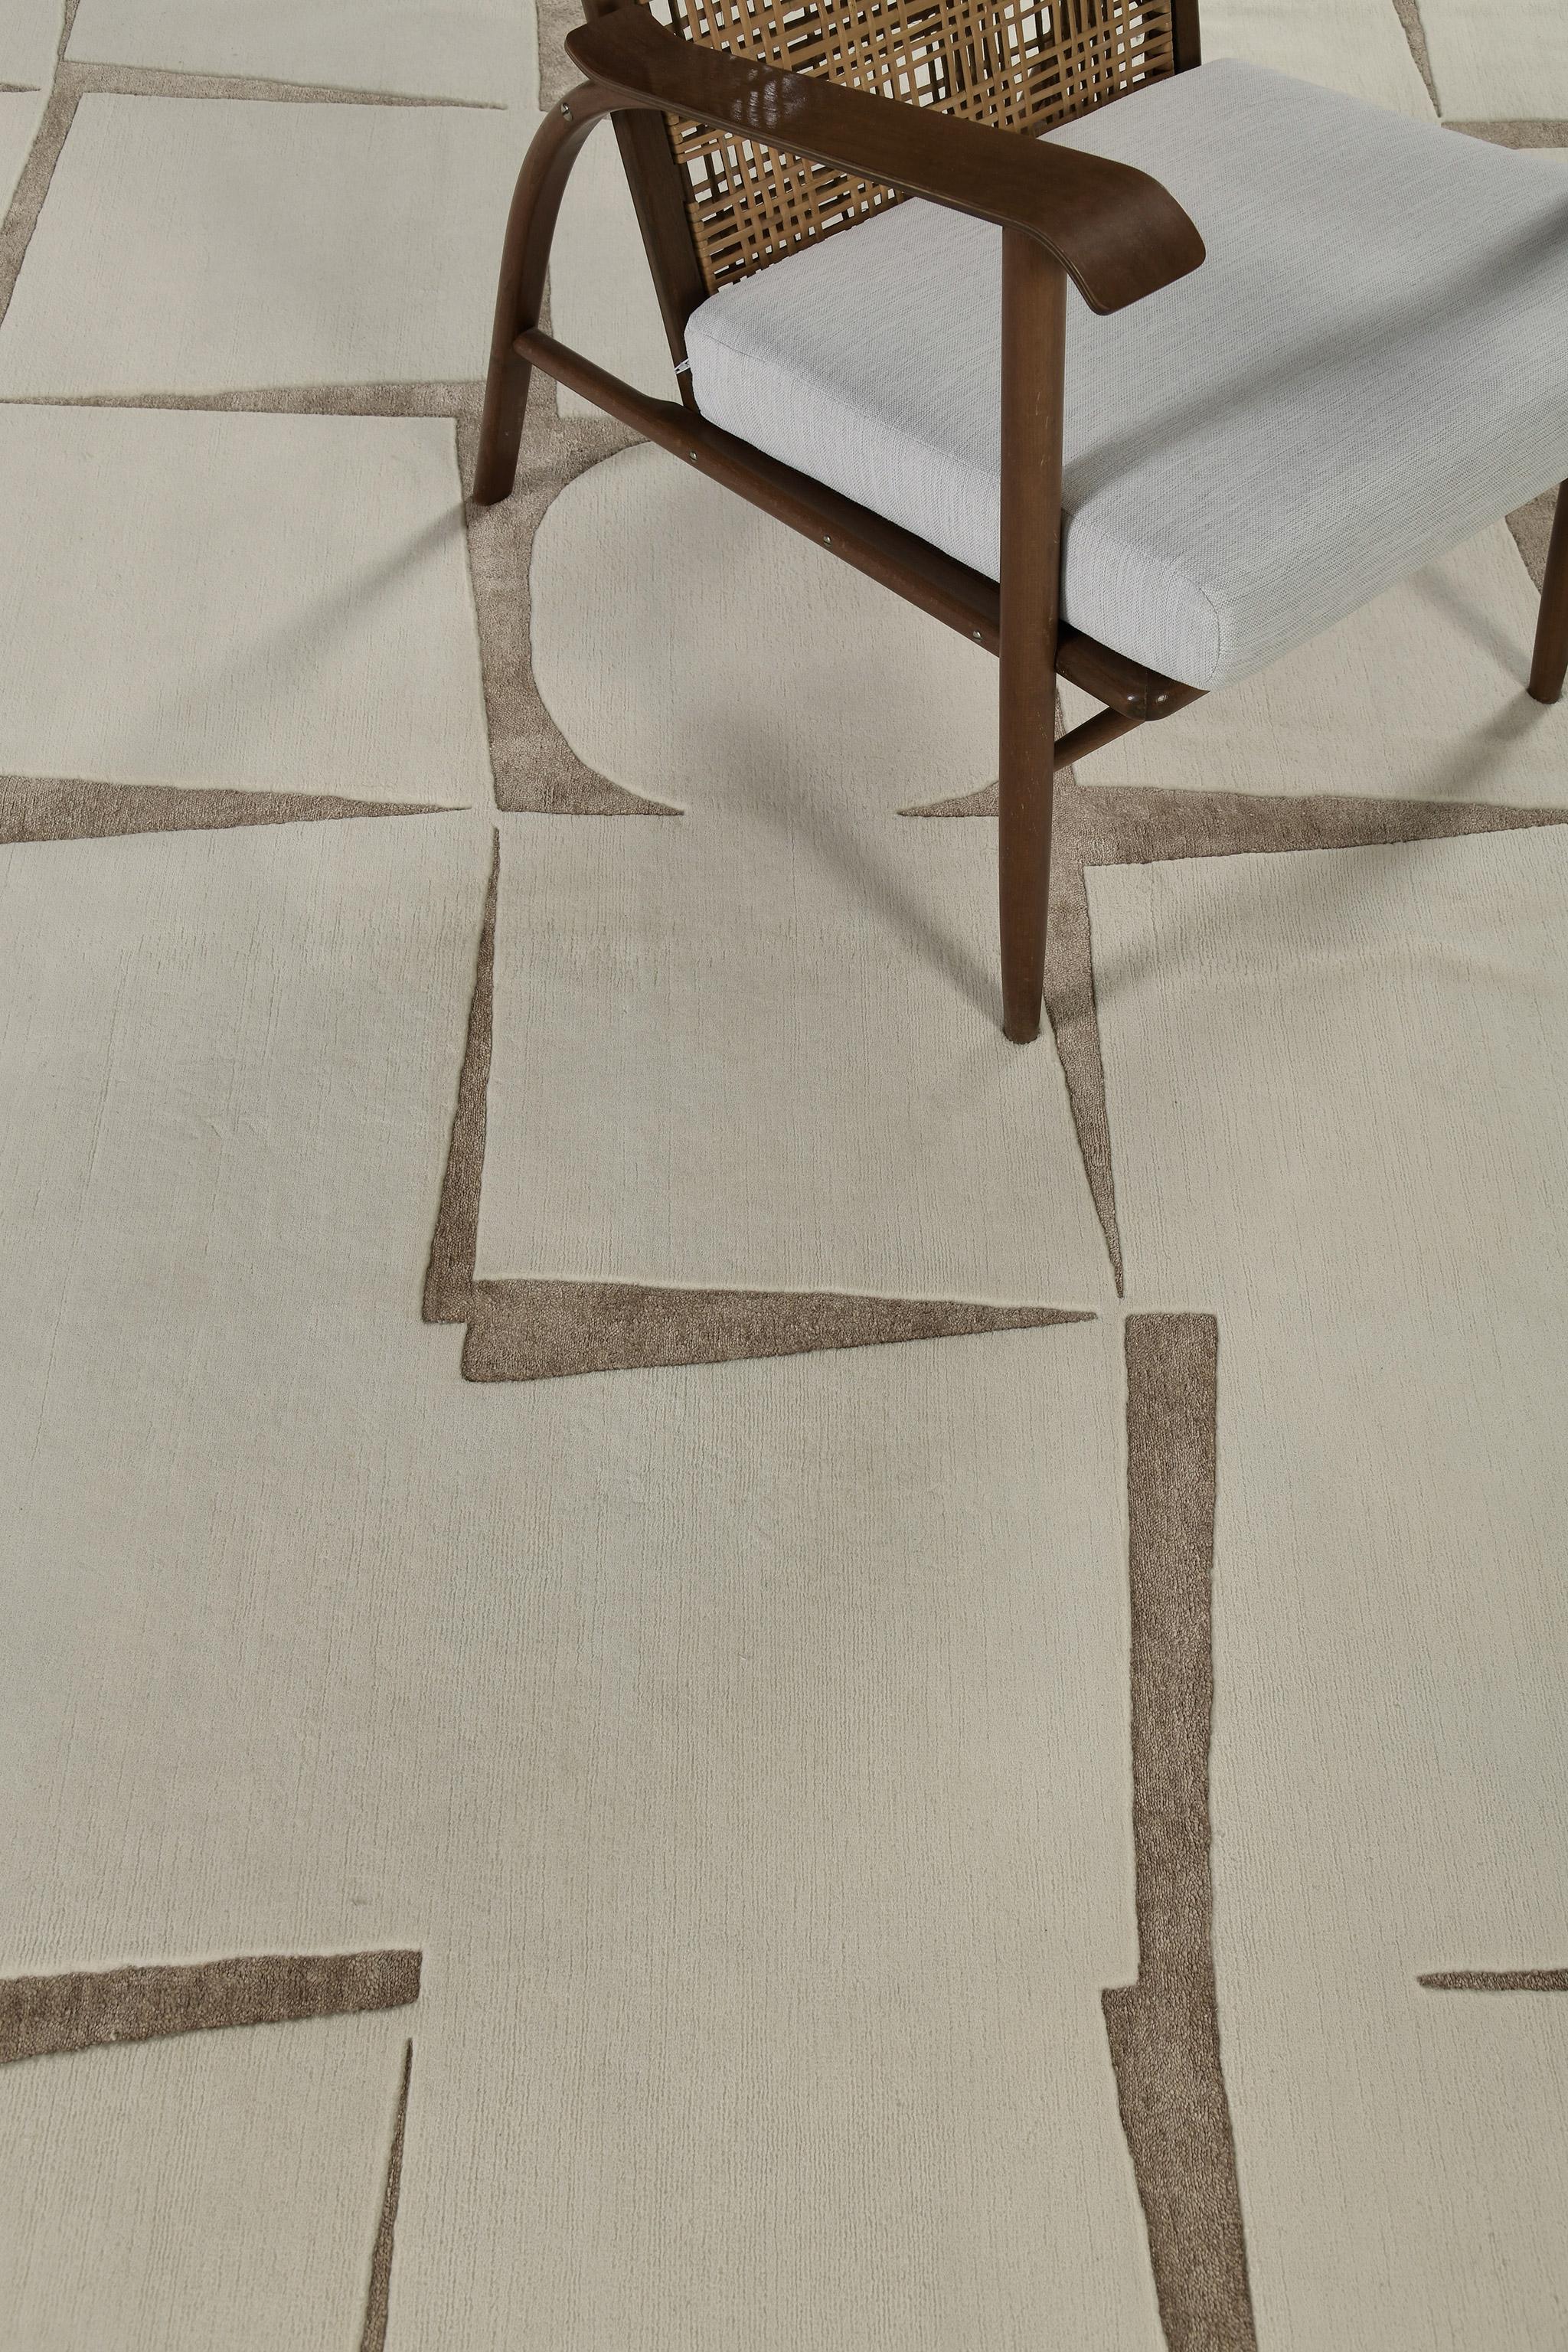 Toccato features stacked geometrical patterns depicting aesthetic artistry. It is a part of the Design Rhymes Collection which pulls inspiration from different aspects of architecture. This rug is rendered in the most soothing shade of ecru and